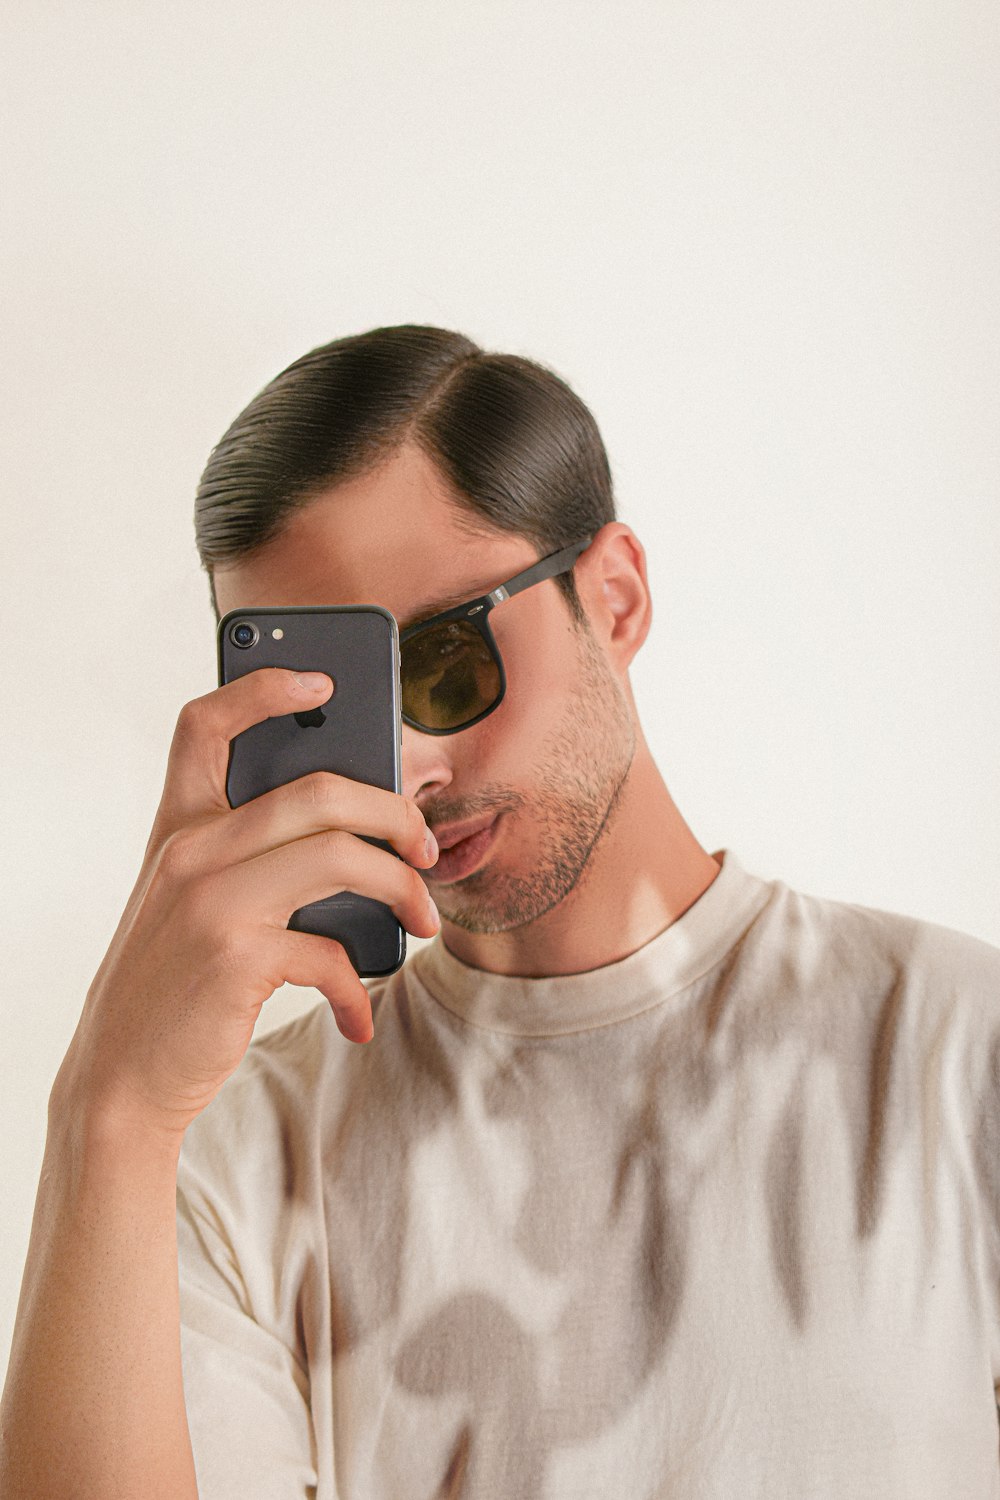 a man wearing sunglasses and holding a phone to his ear